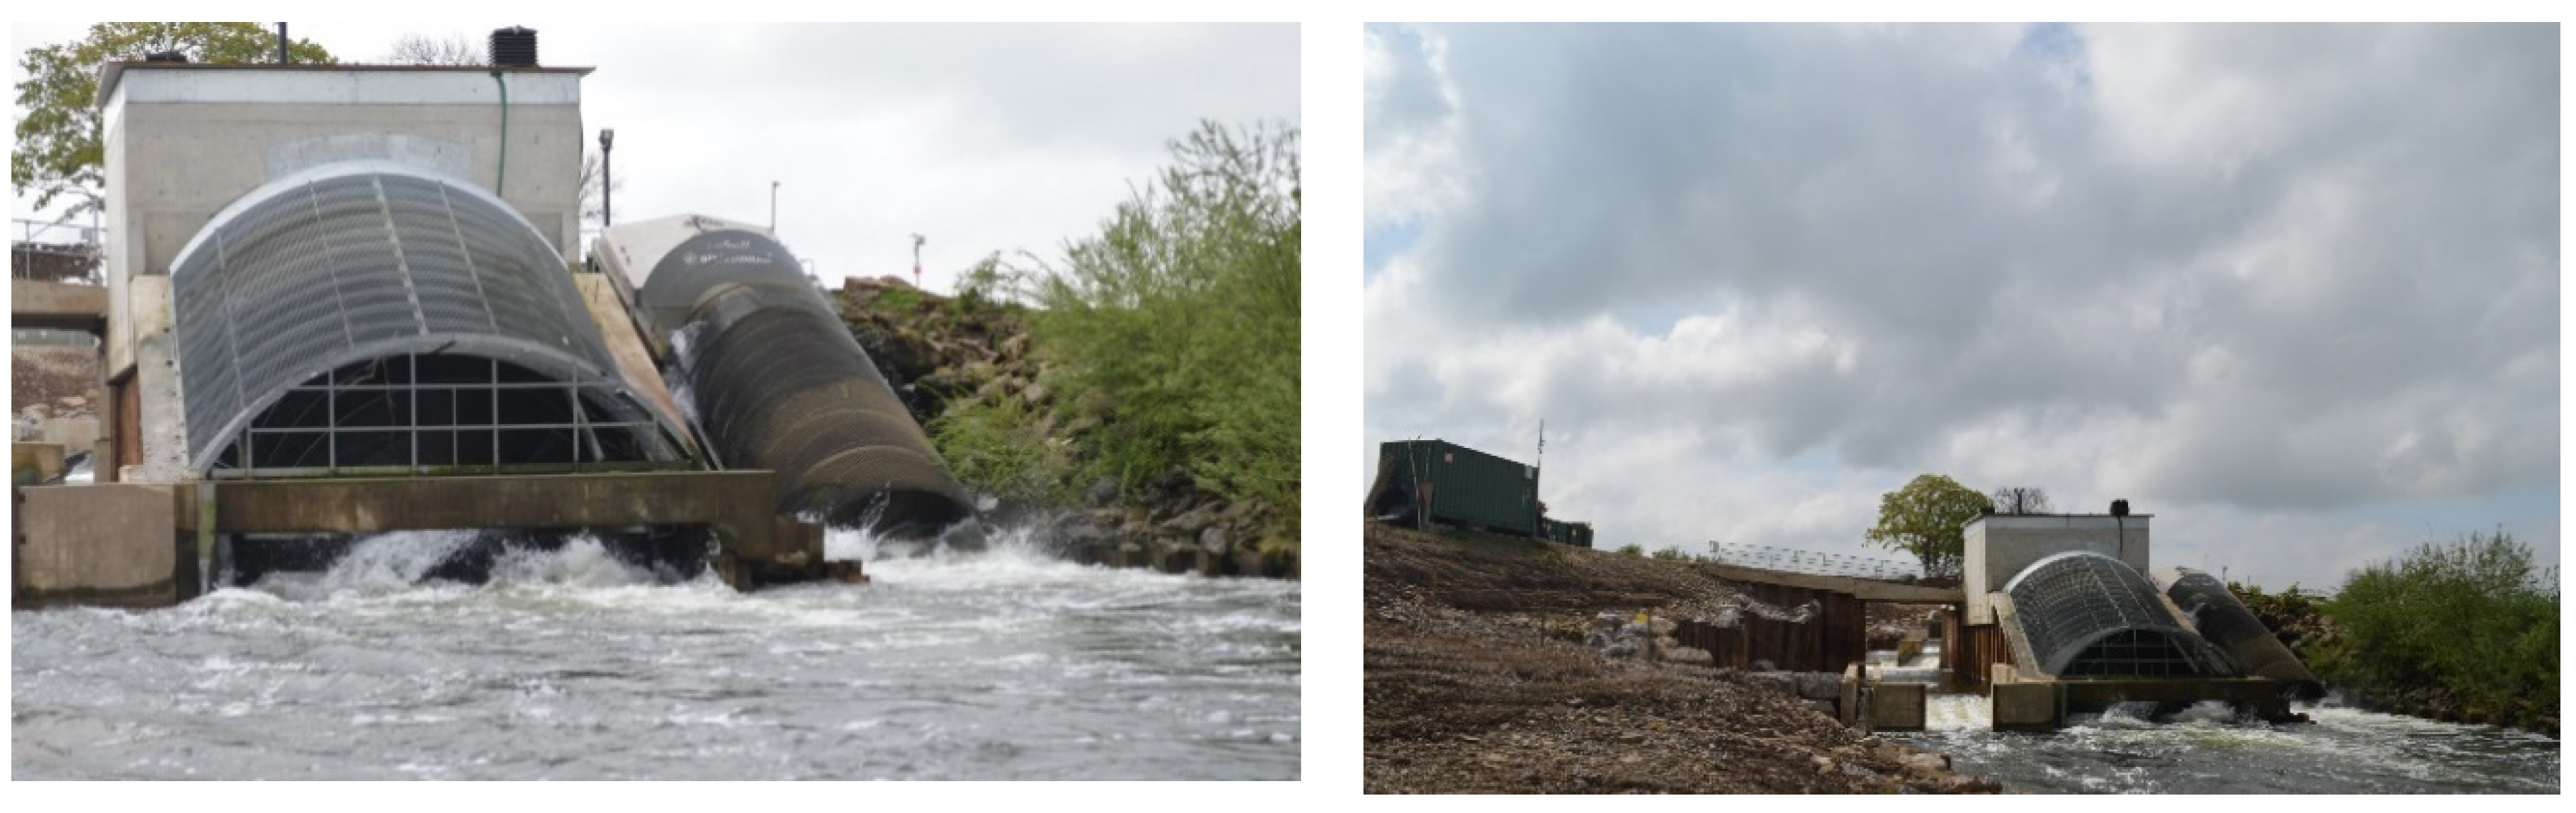 Sustainability Free Full-Text Archimedes Screw Turbines A Sustainable Development Solution for Green and Renewable Energy Generation—A Review of Potential and Design Procedures